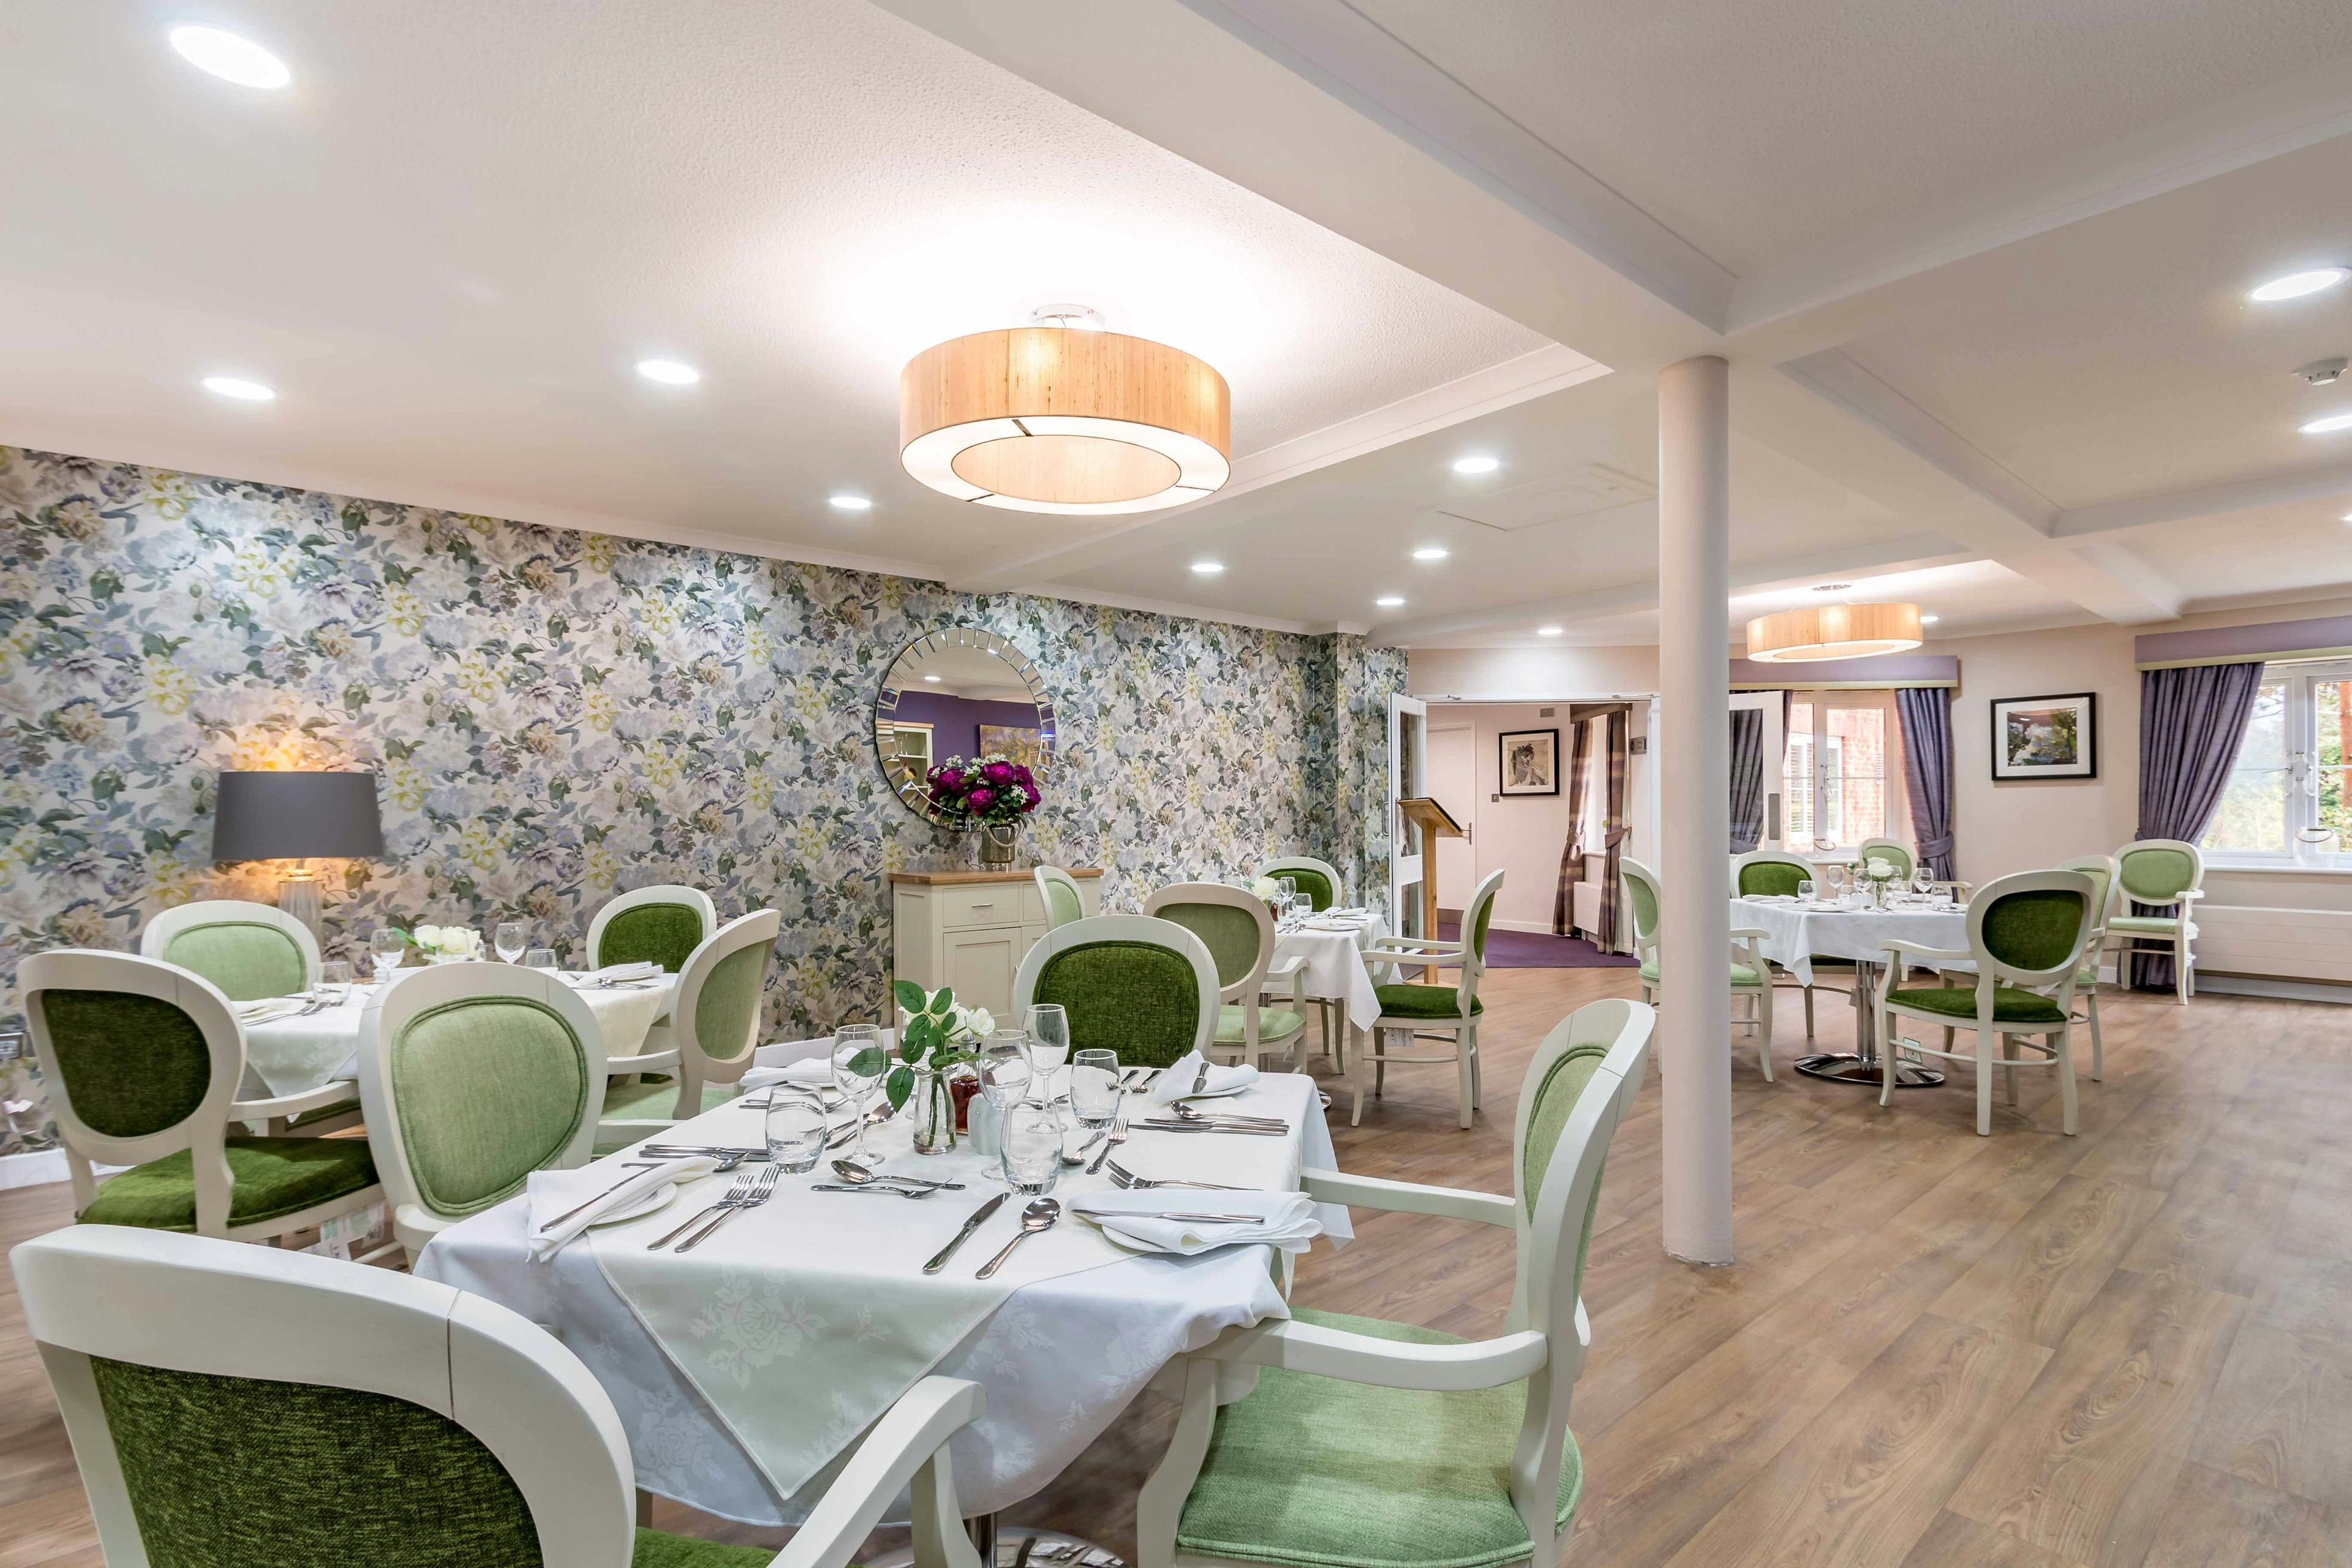 Dining Room at Shelburne Lodge Care Home in High Wycombe, Buckinghamshire